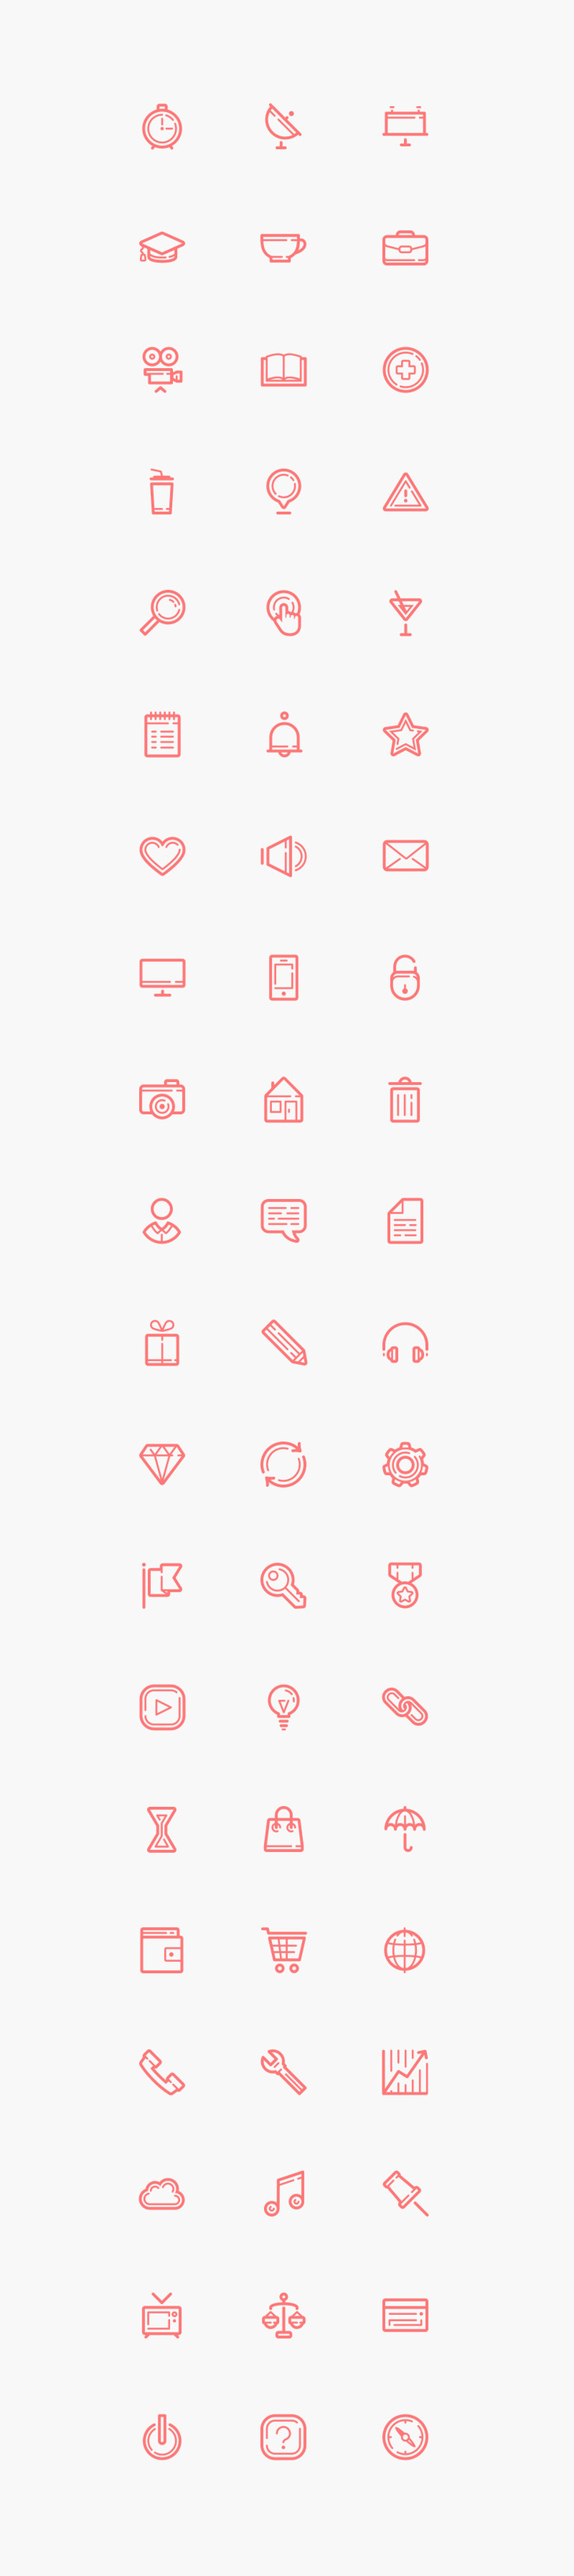 60 Free Vector Icons